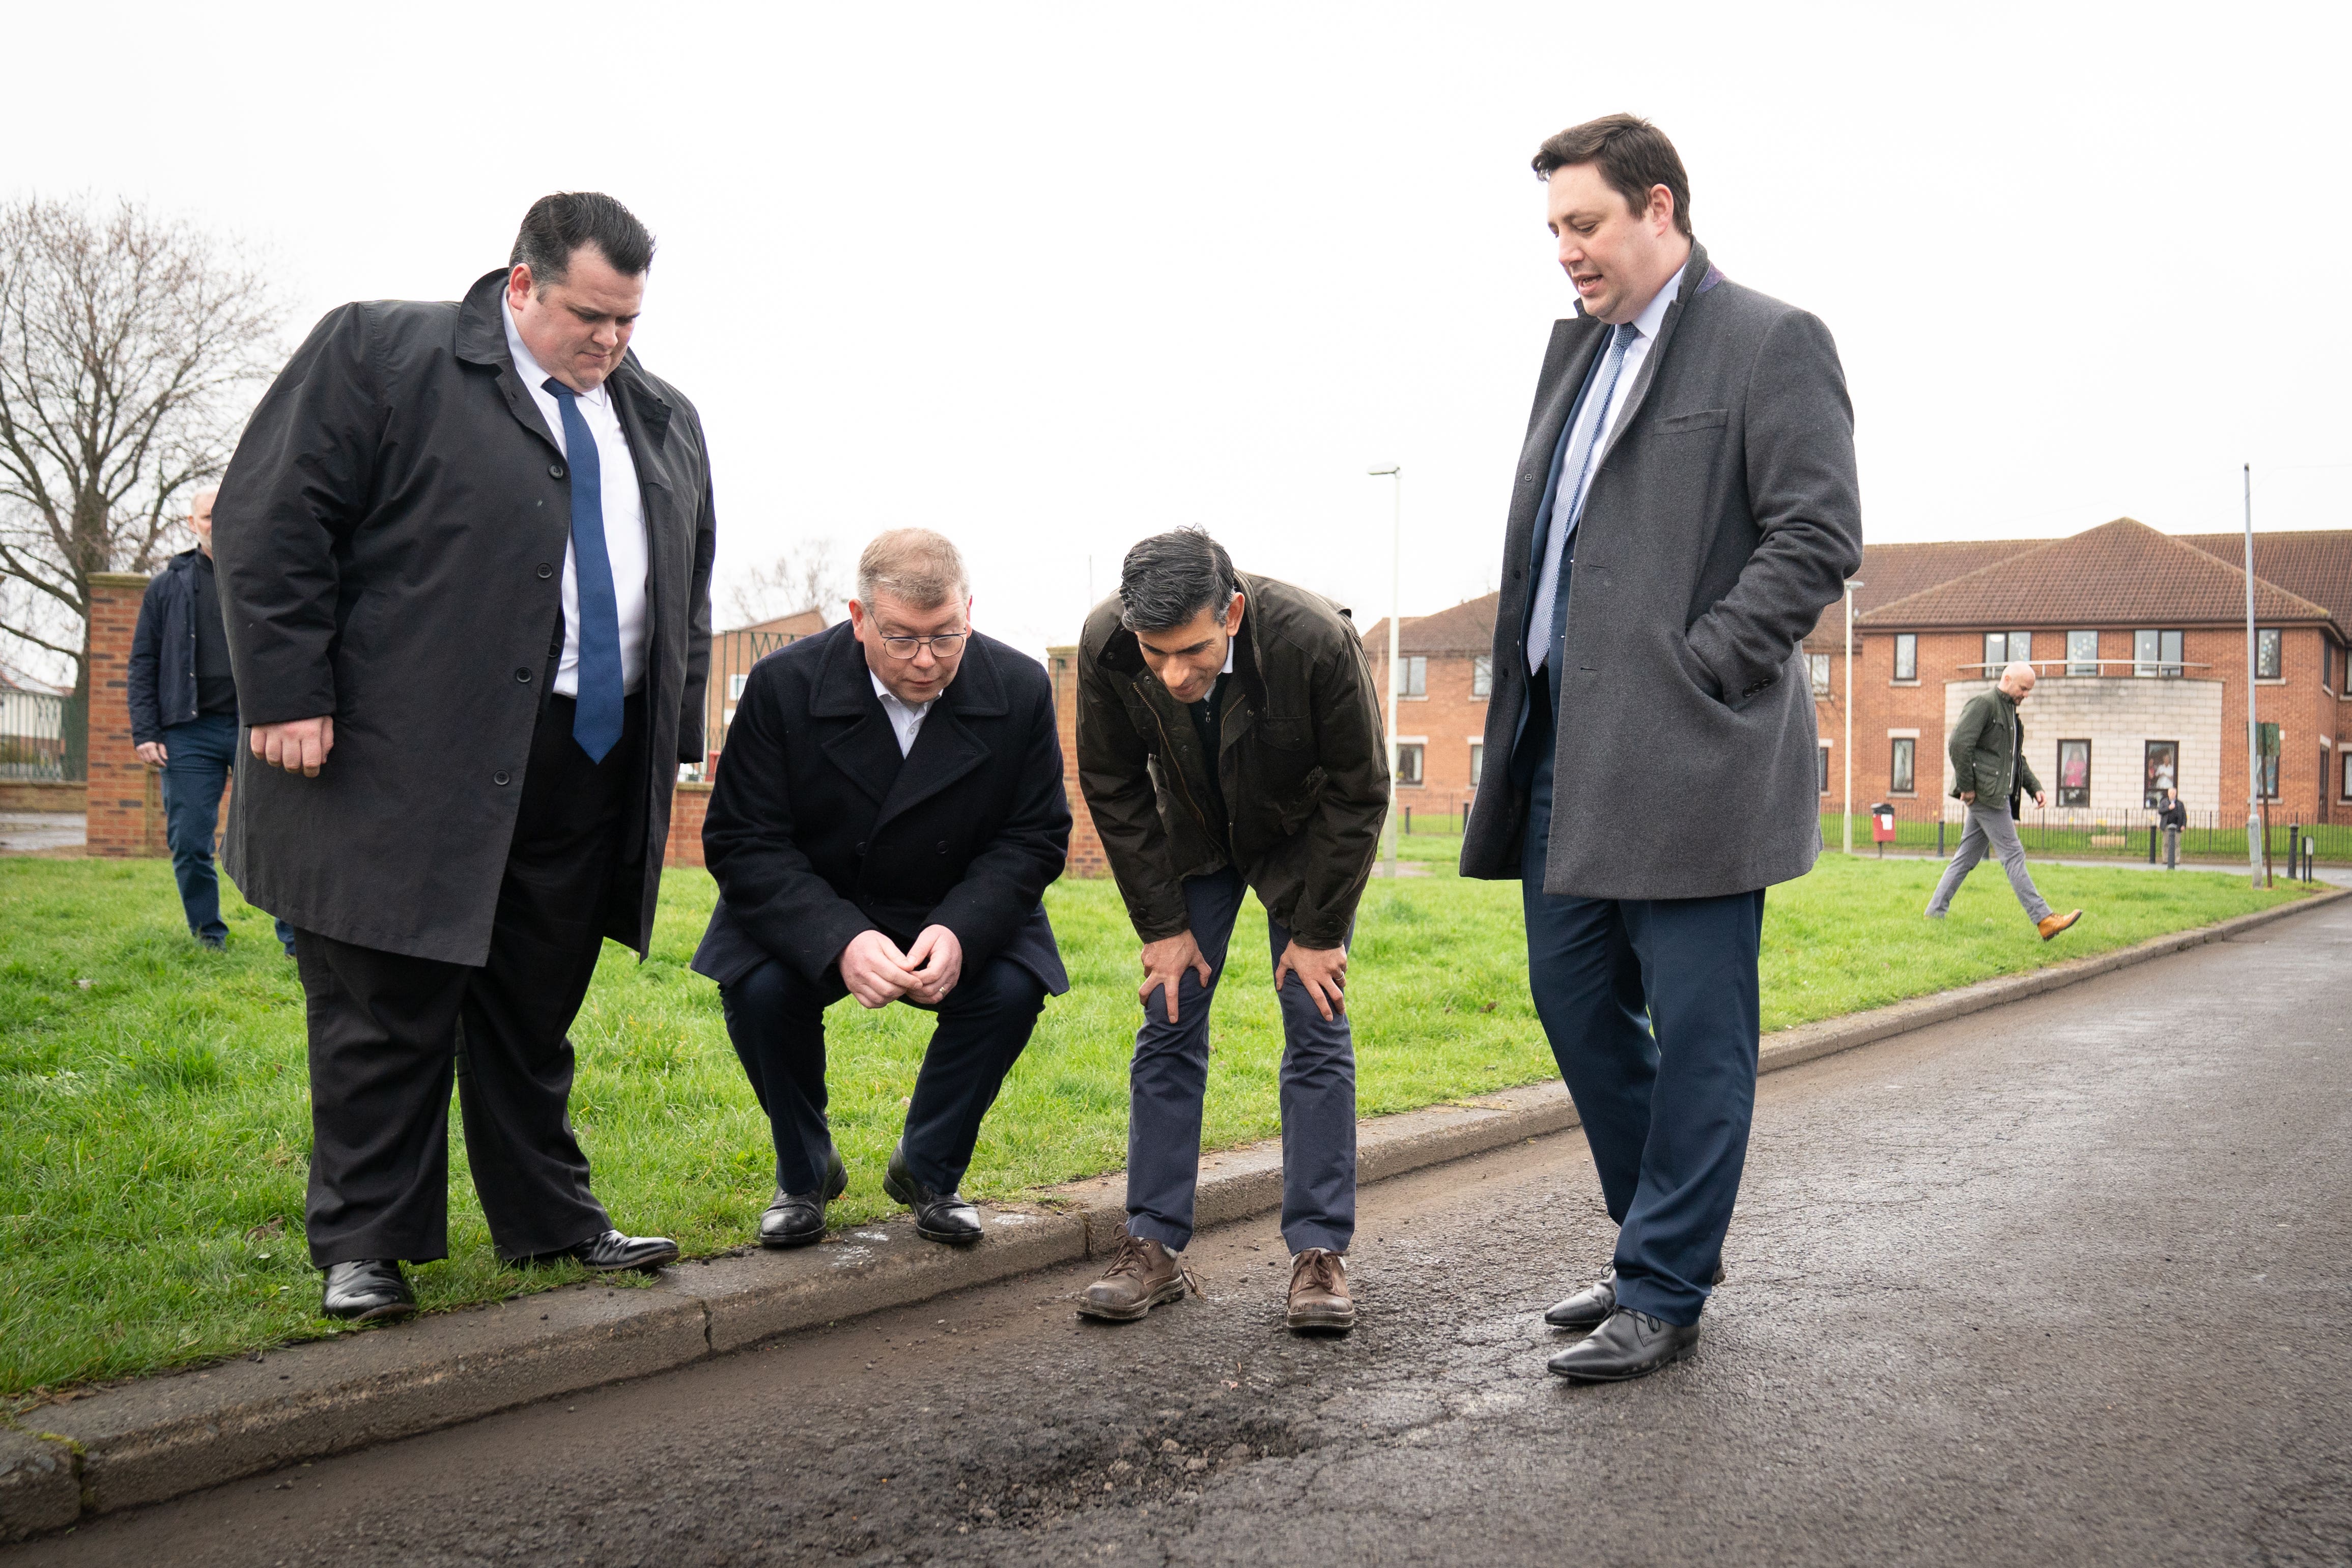 Prime Minister Rishi Sunak with Darlington Council leader Jonathan Dulston (far left), Tees Valley Mayor Ben Houchen (far right) and Darlington MP Peter Gibson (second from left) in Firth Moor during a visit to Darlington, County Durham where he discussed local issues and how money announced in this year’s budget would be spent on fixing the region’s roads and repairing potholes. Picture date: Friday March 31, 2023.